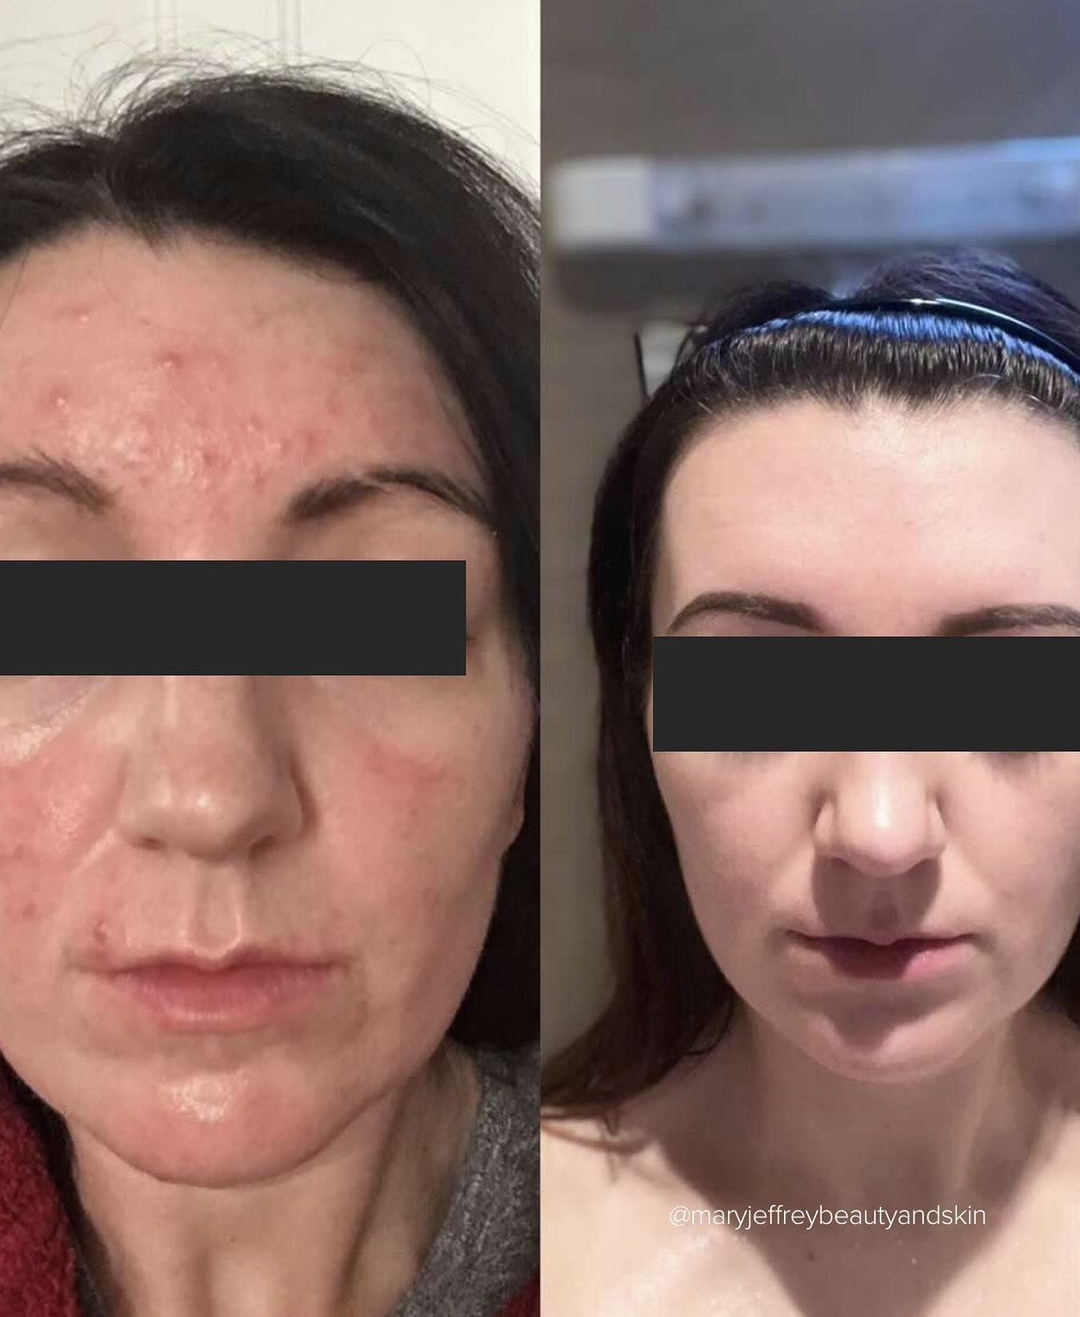 Before and after results of an acne treatment.